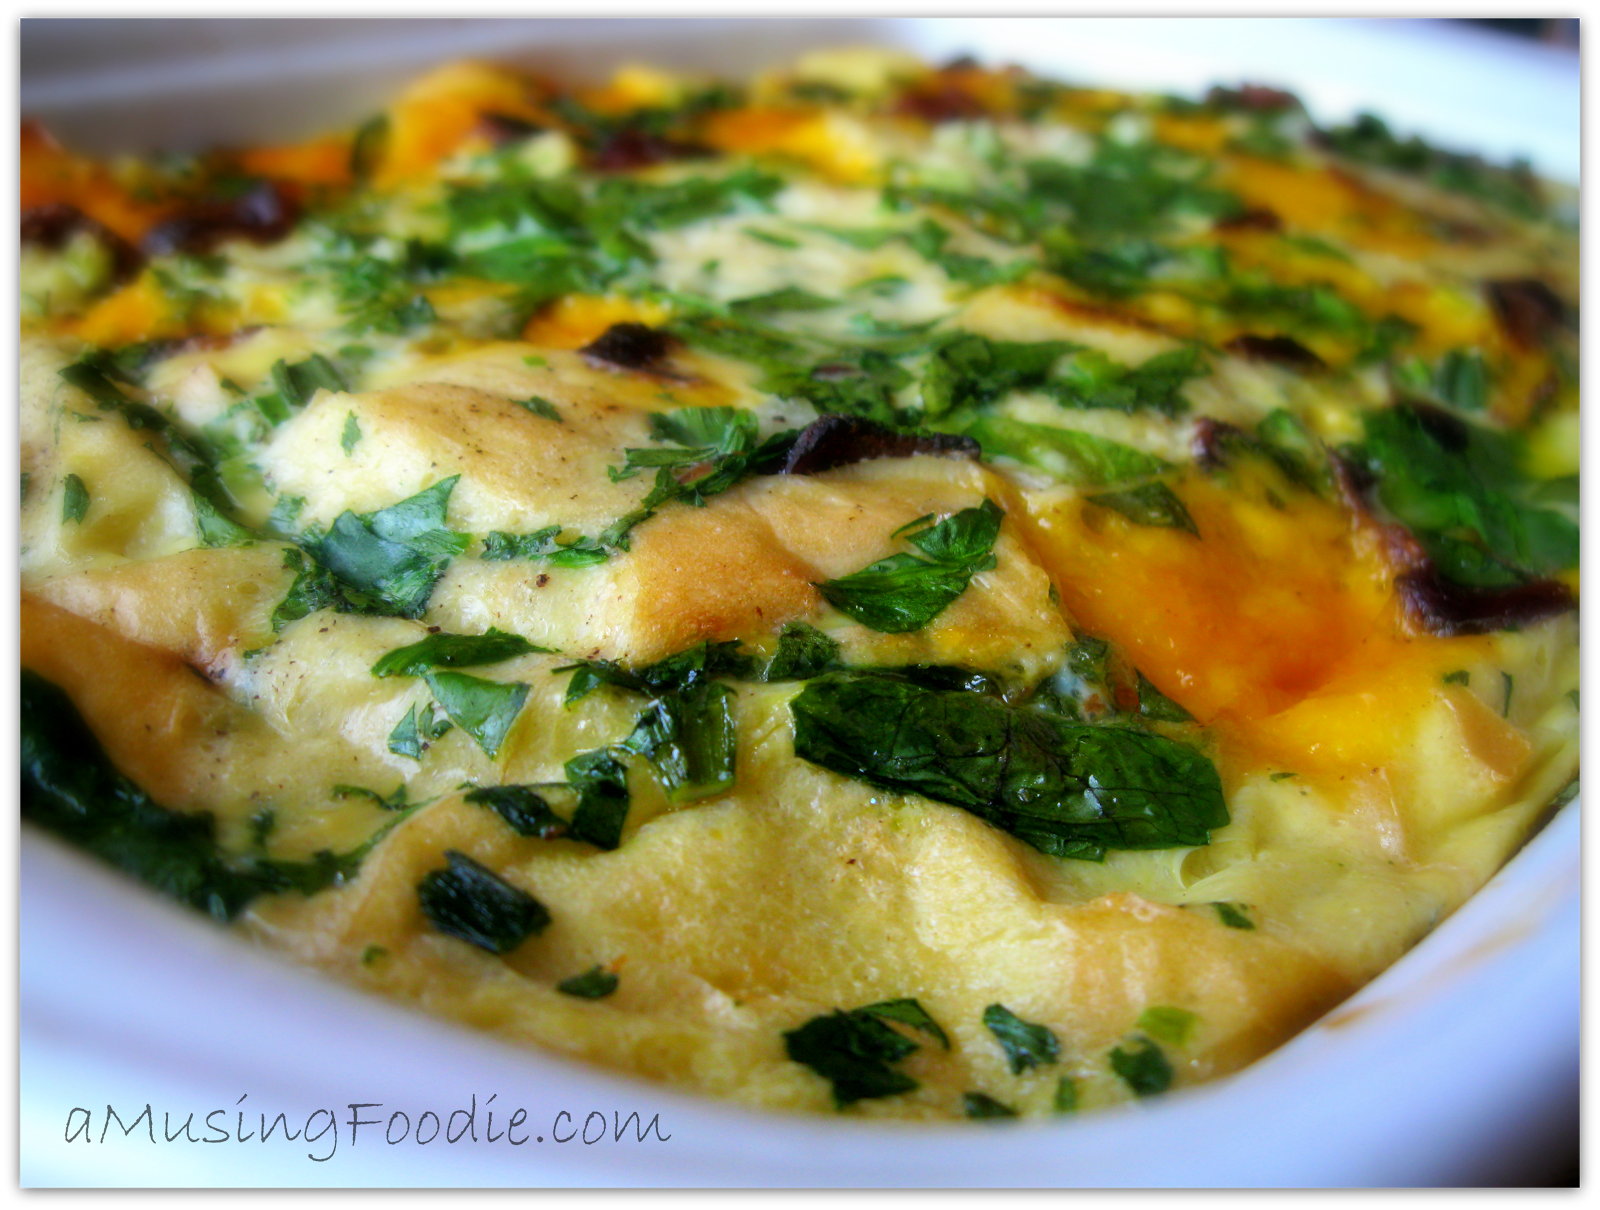 What is a quick and easy egg casserole recipe?